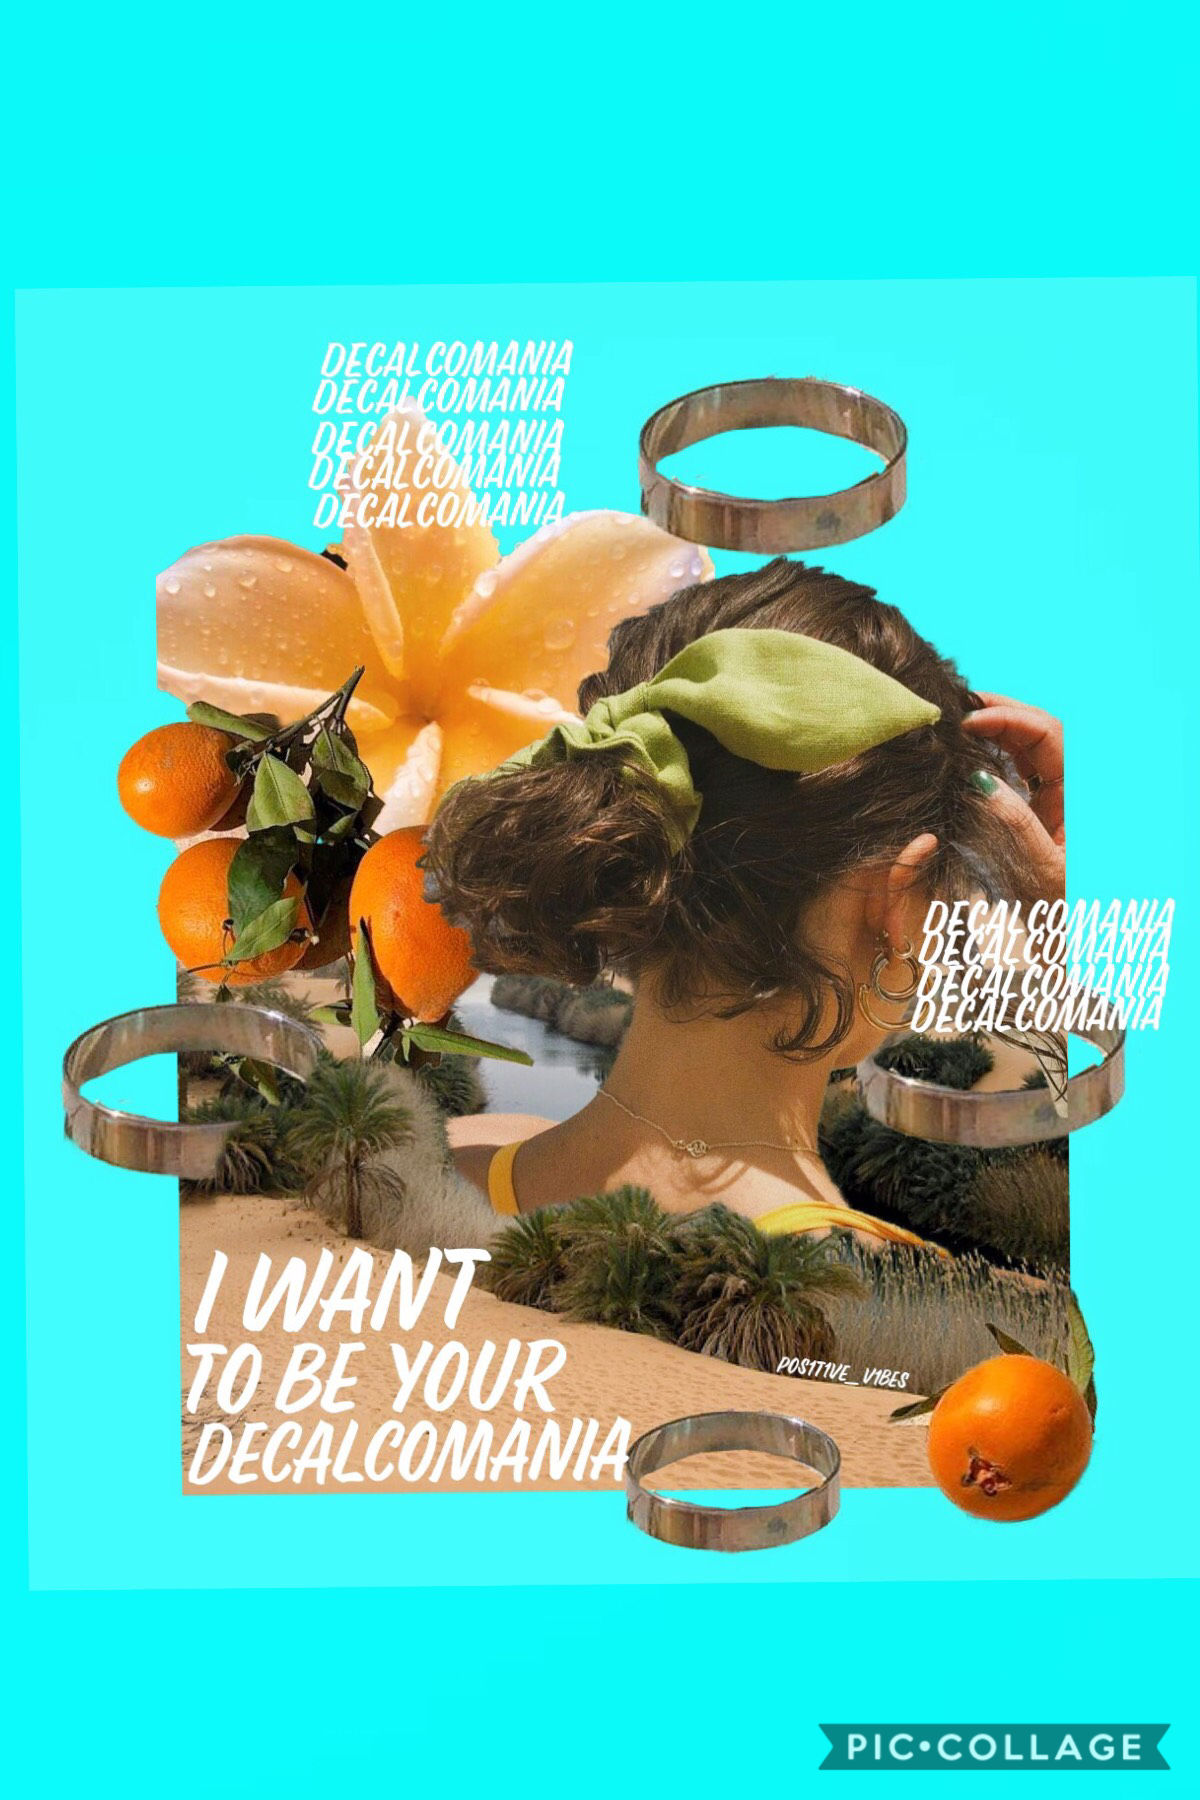 🍊lyrics from, “decalcomania” by jungkook🍊here’s a collage before I go back to school lol🍊 not looking forward to it,, my classes are so mixed up & confusing yEP🍊i’ll be somewhat inactive :)🍊inspired by the one & only @castlescience !🍊
#PCONLY
#SCHOOL
#CON